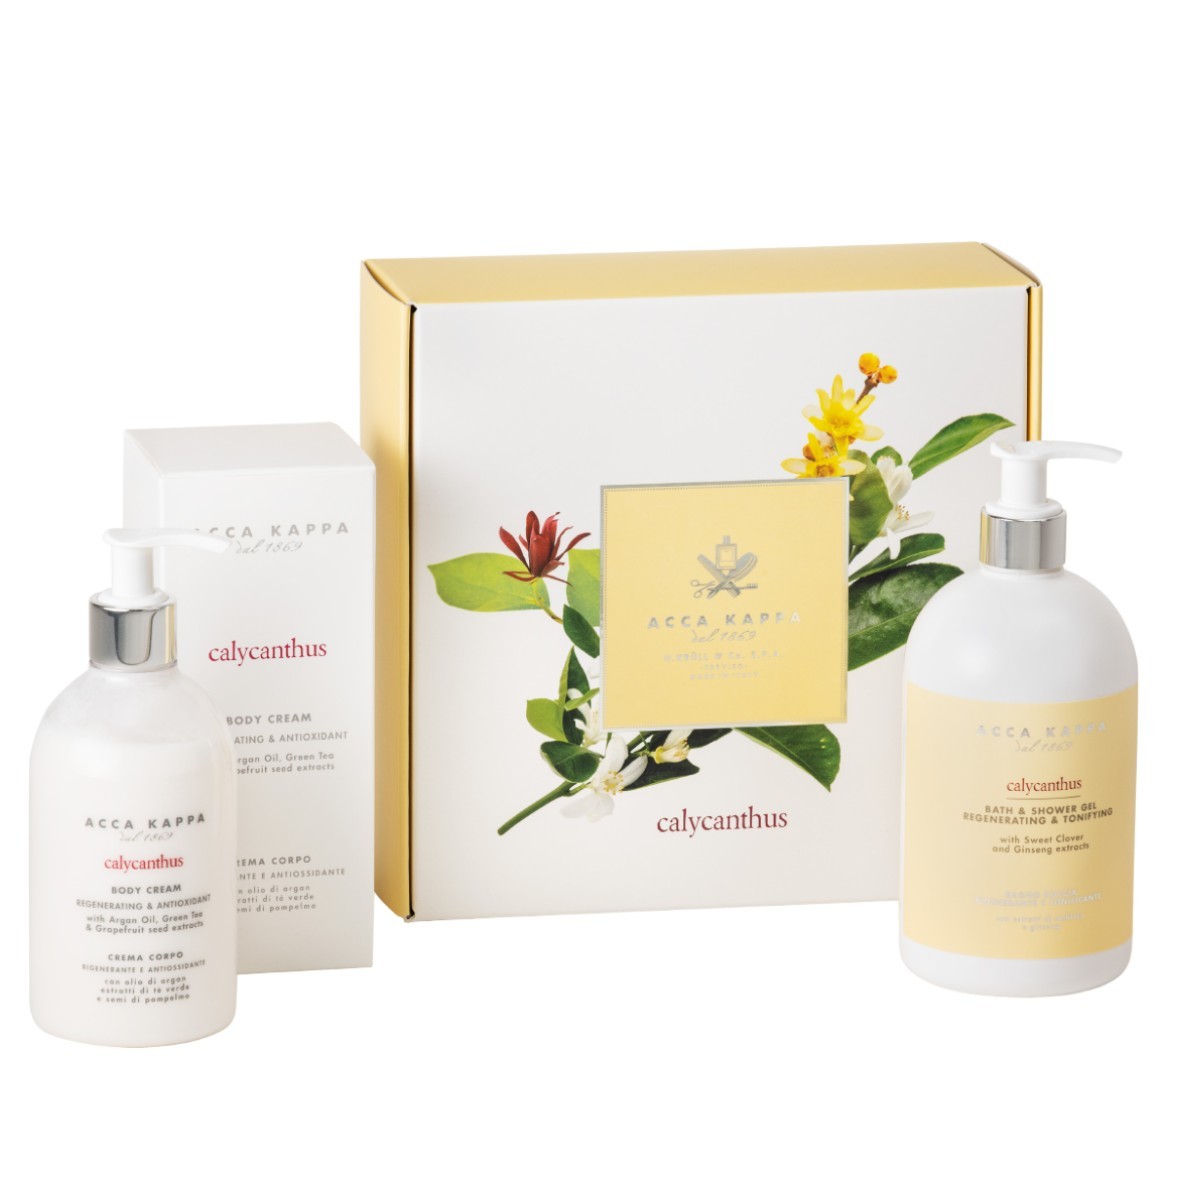 ACCA KAPPA Calycanthus Gift Set, Shower Gel 500ml and Body Lotion 300ml